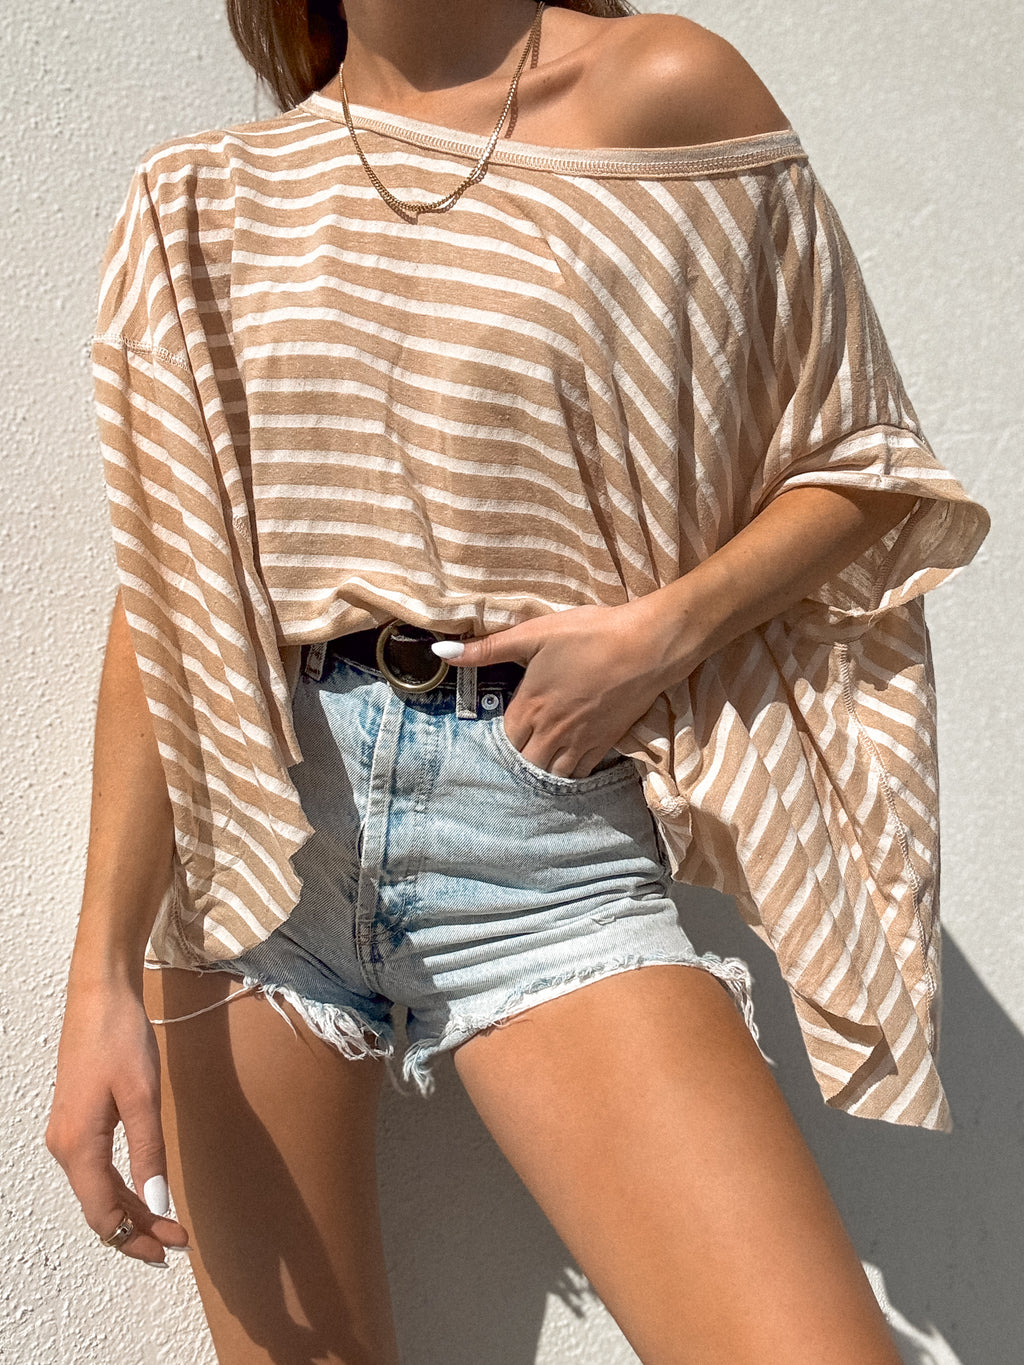 Taking Sides Flowy Top in Natural - Stitch And Feather